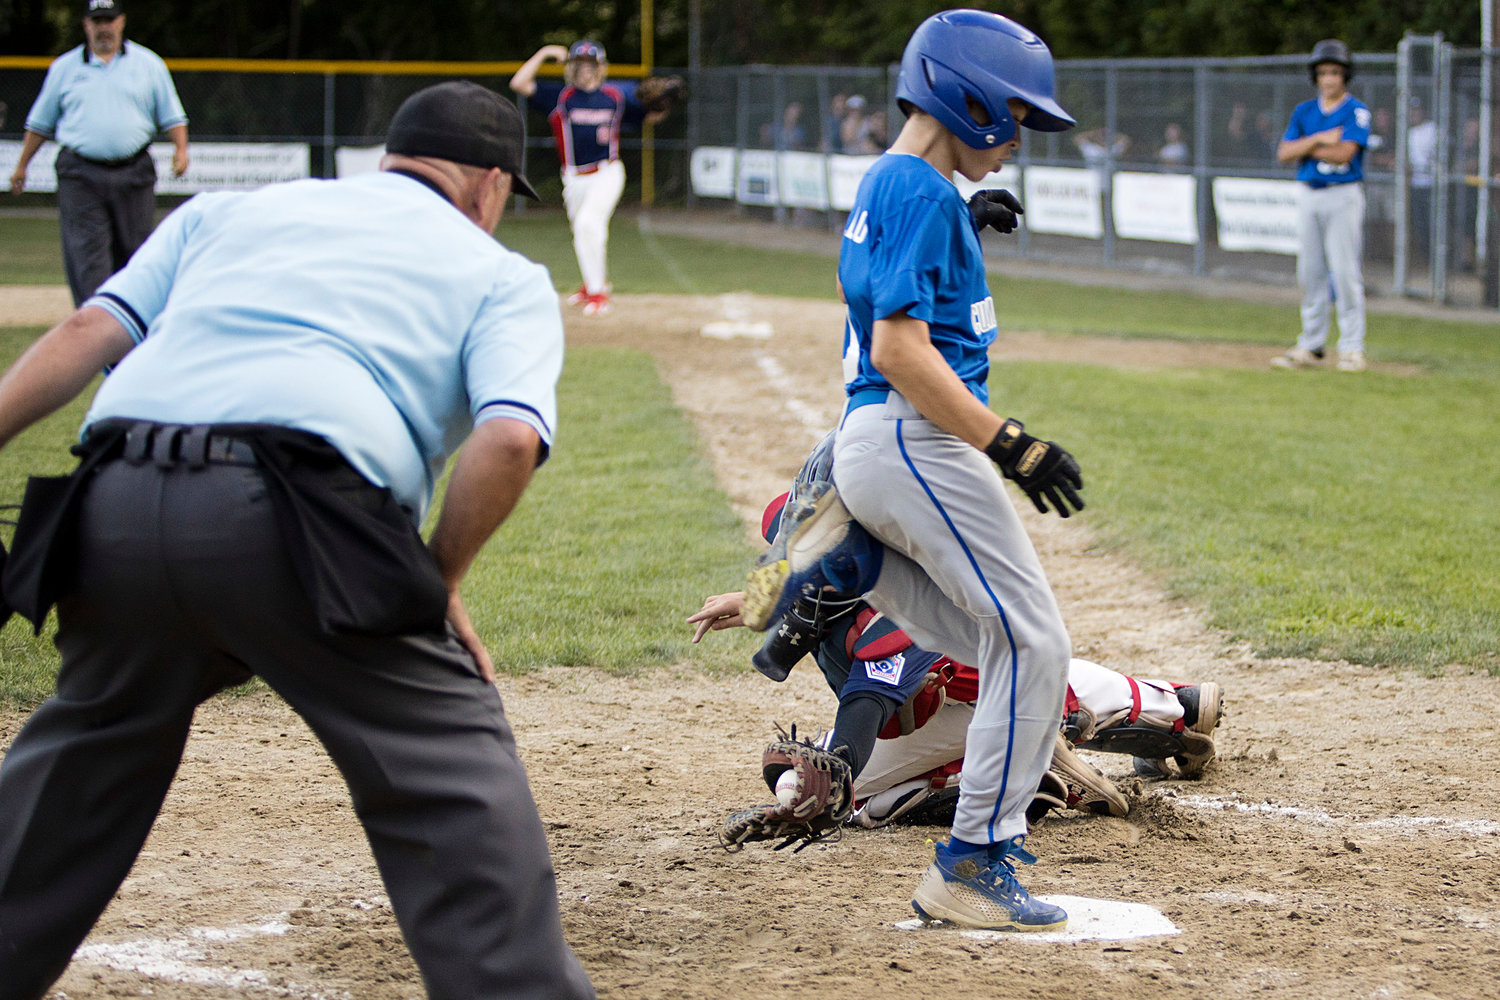 Catcher Ryan Campion just misses the tag as Cumberland’s Dean Corvello steps on home plate in the second inning.